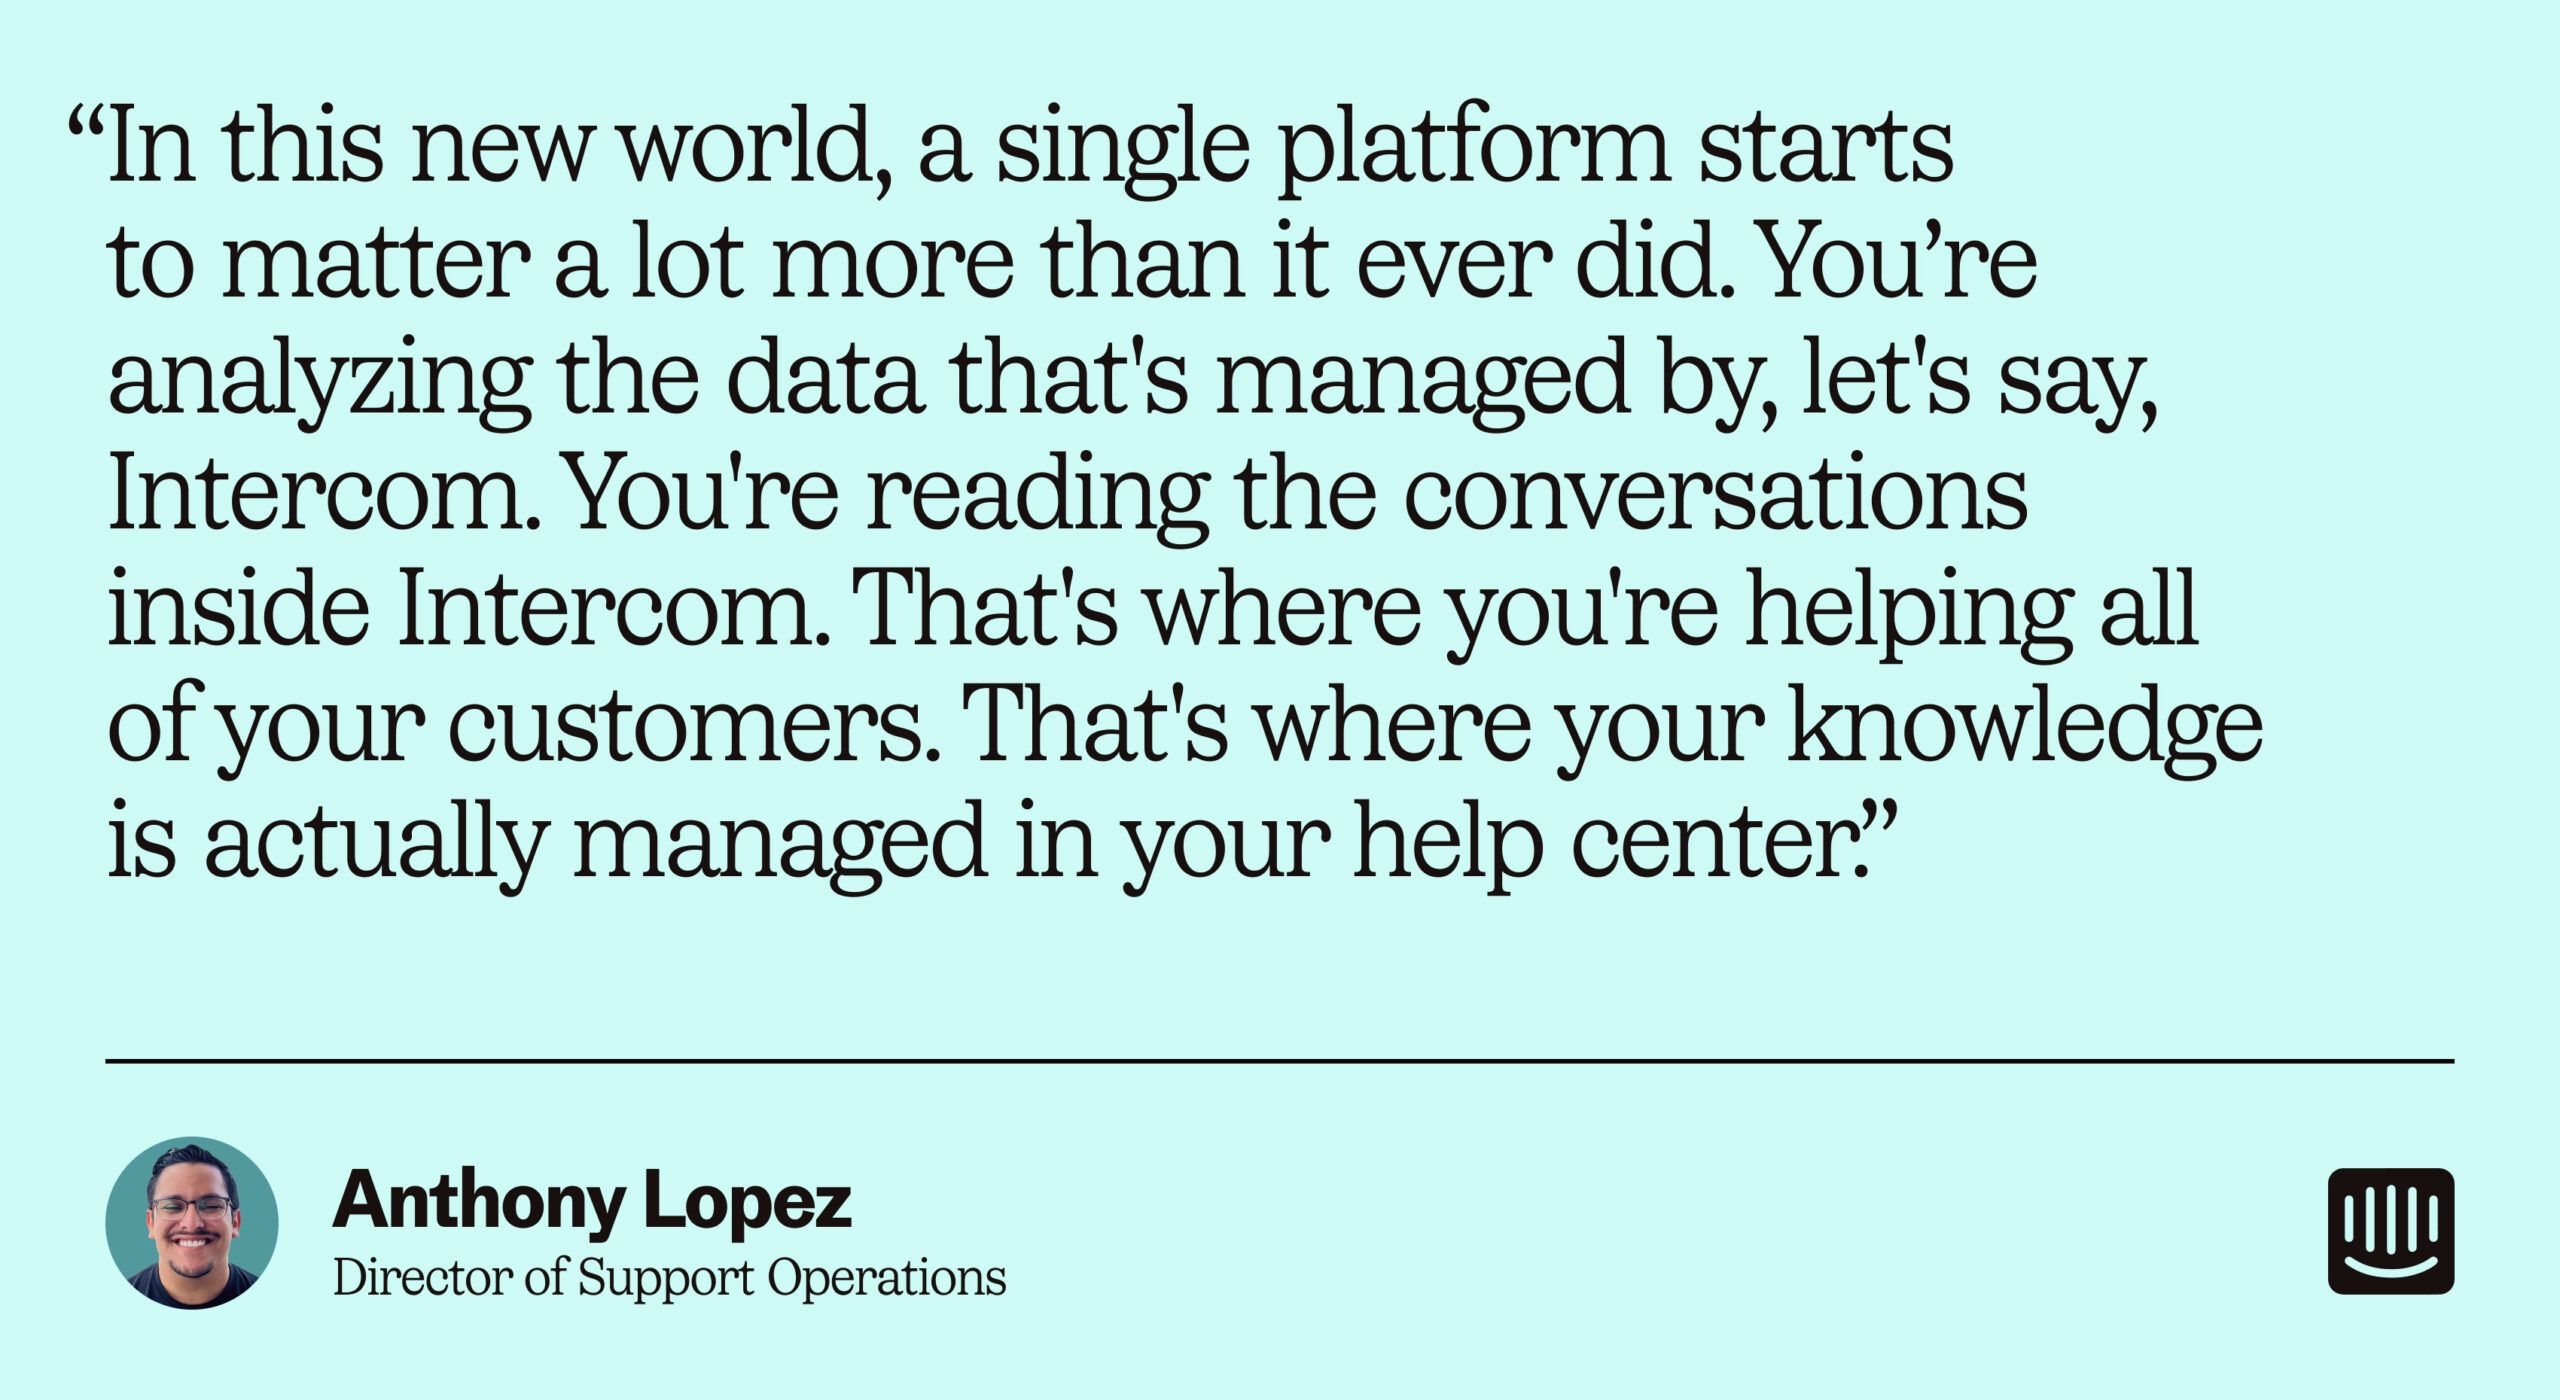 “In this new world, a single platform starts to matter a lot more than it ever did. You’re analyzing the data that's managed by, let's say, Intercom. You're reading the conversations inside Intercom. That's where you're helping all of your customers. That's where your knowledge is actually managed in your help center.” – Anthony Lopez, Director of Support Operations at Intercom